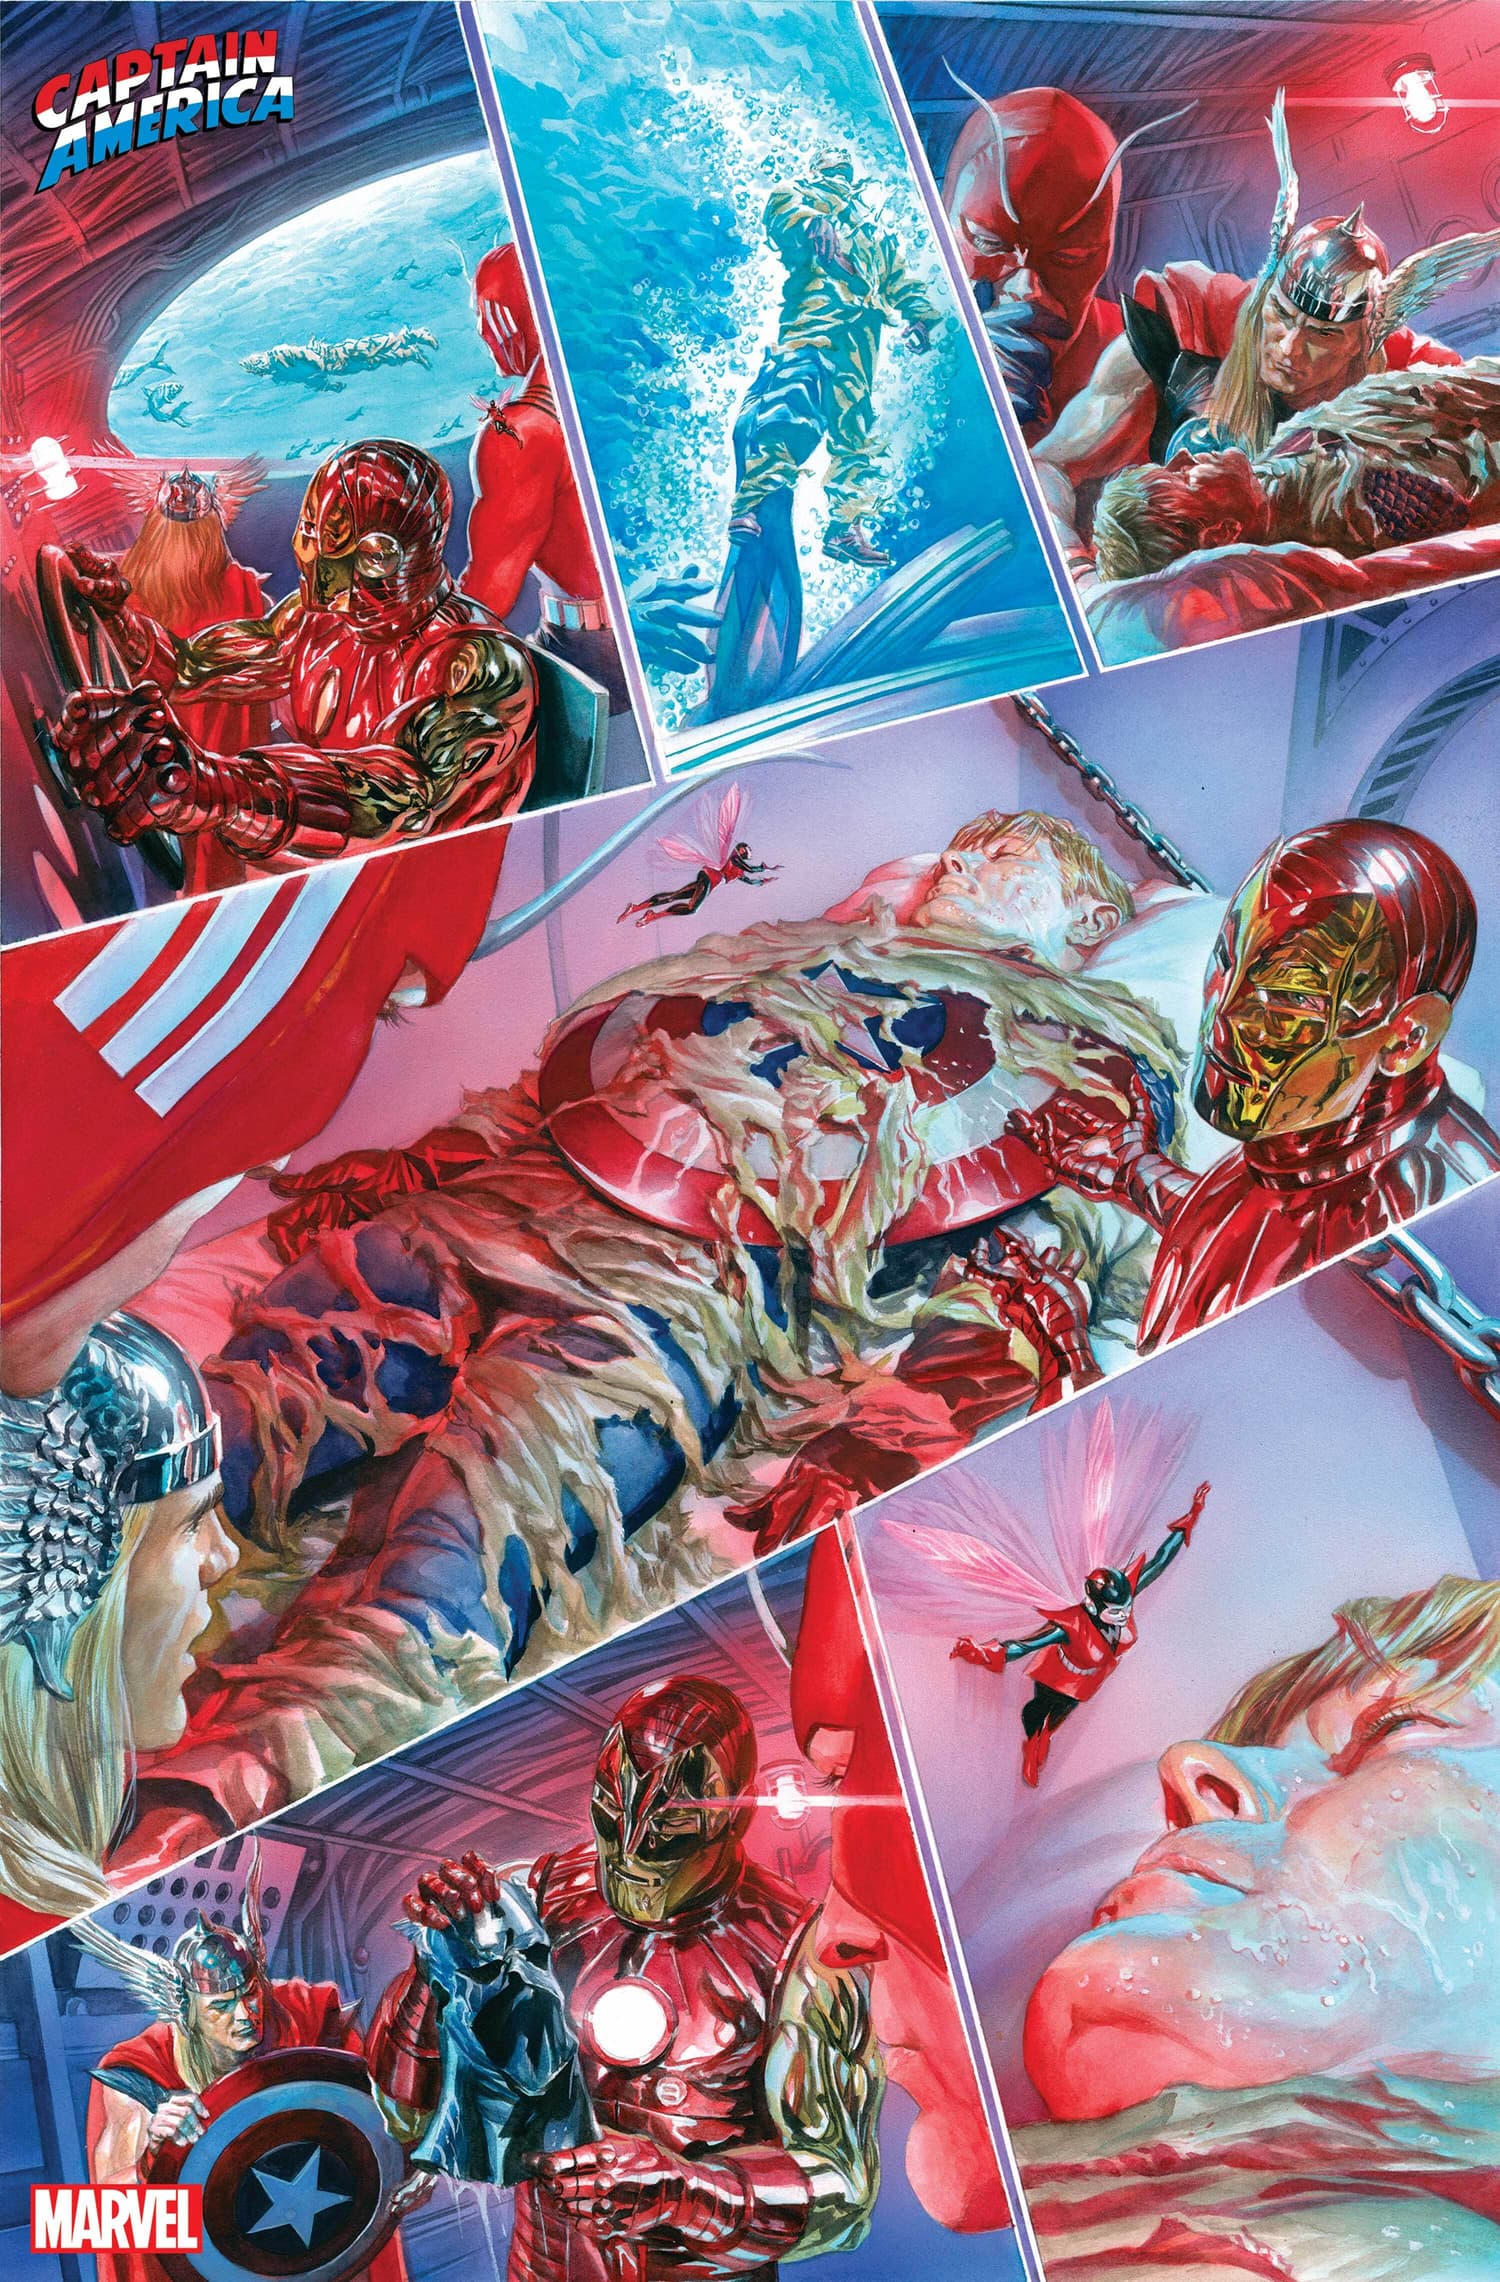 CAPTAIN AMERICA TRIBUTE #1 preview art by Alex Ross